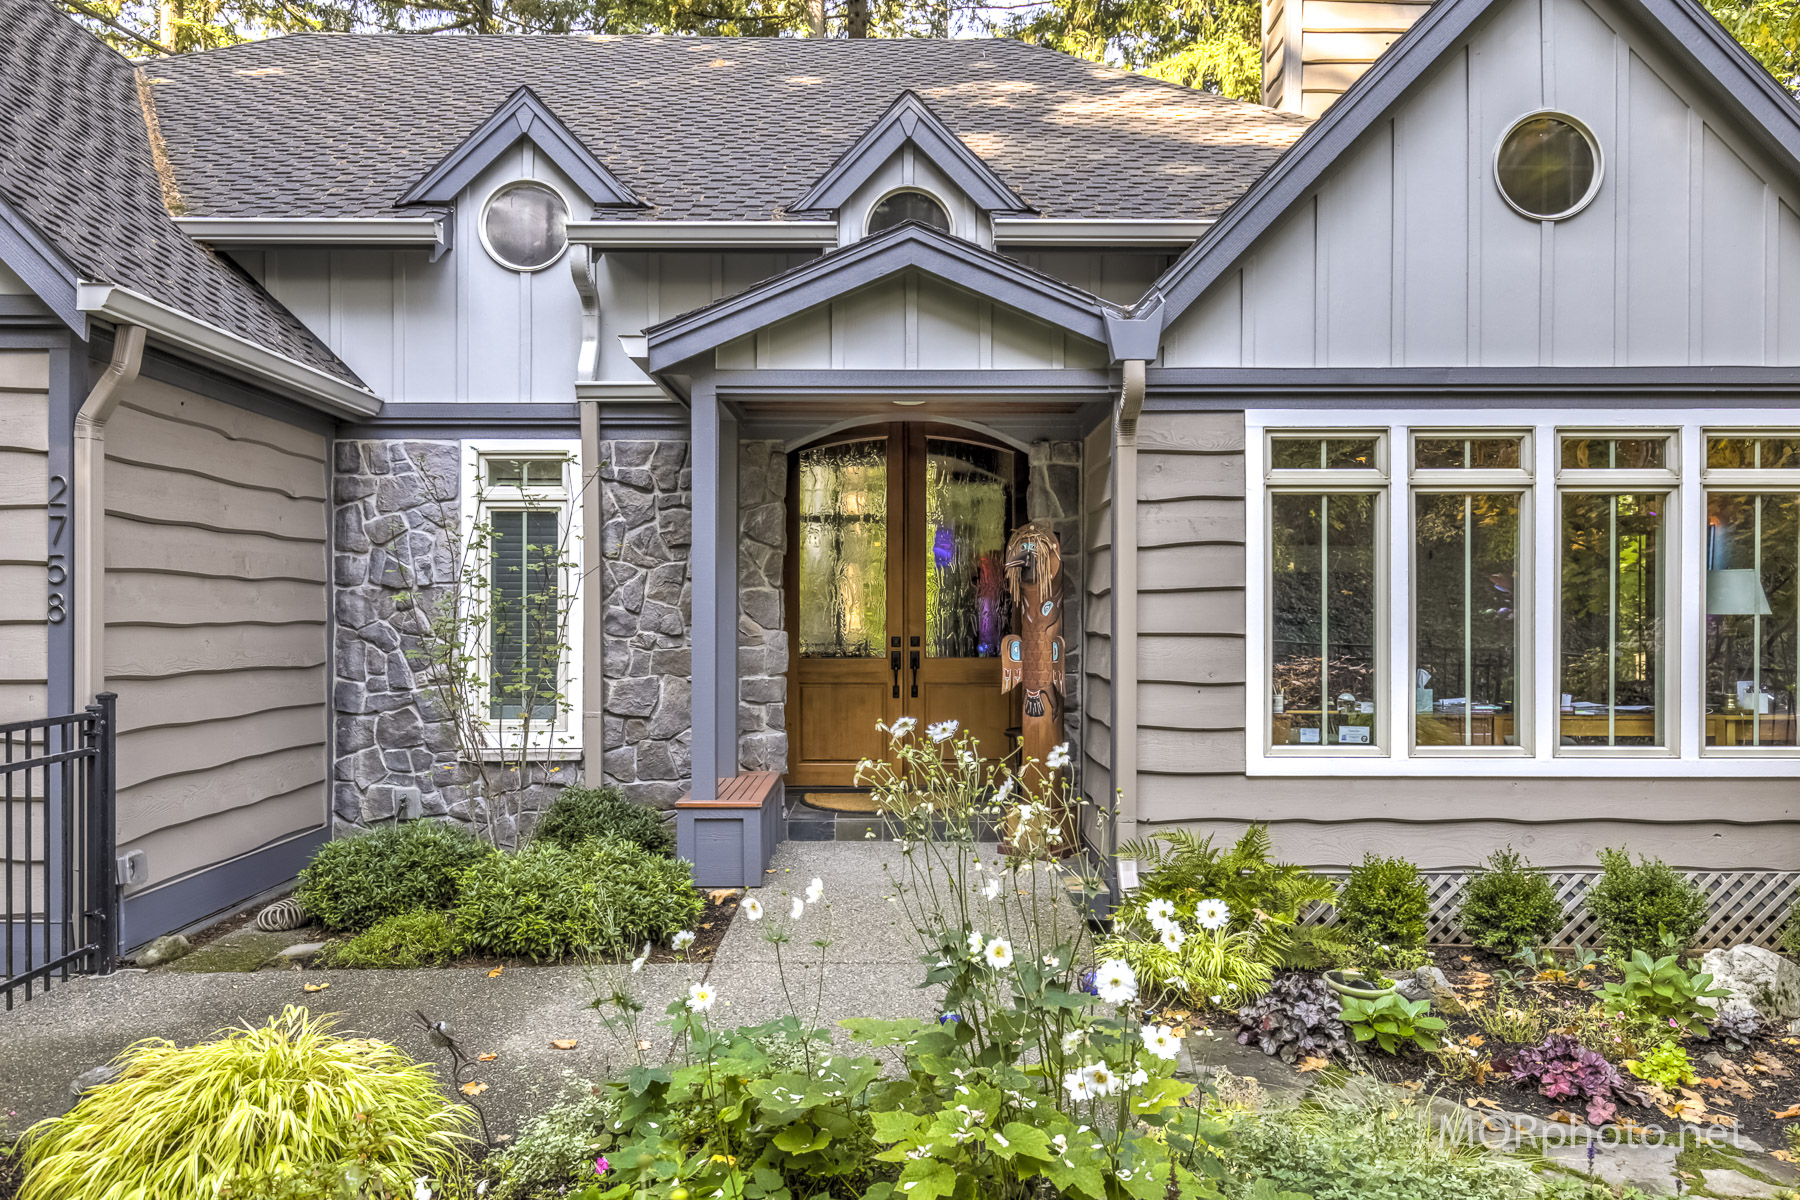 Tips for Choosing Exterior Paint Colors